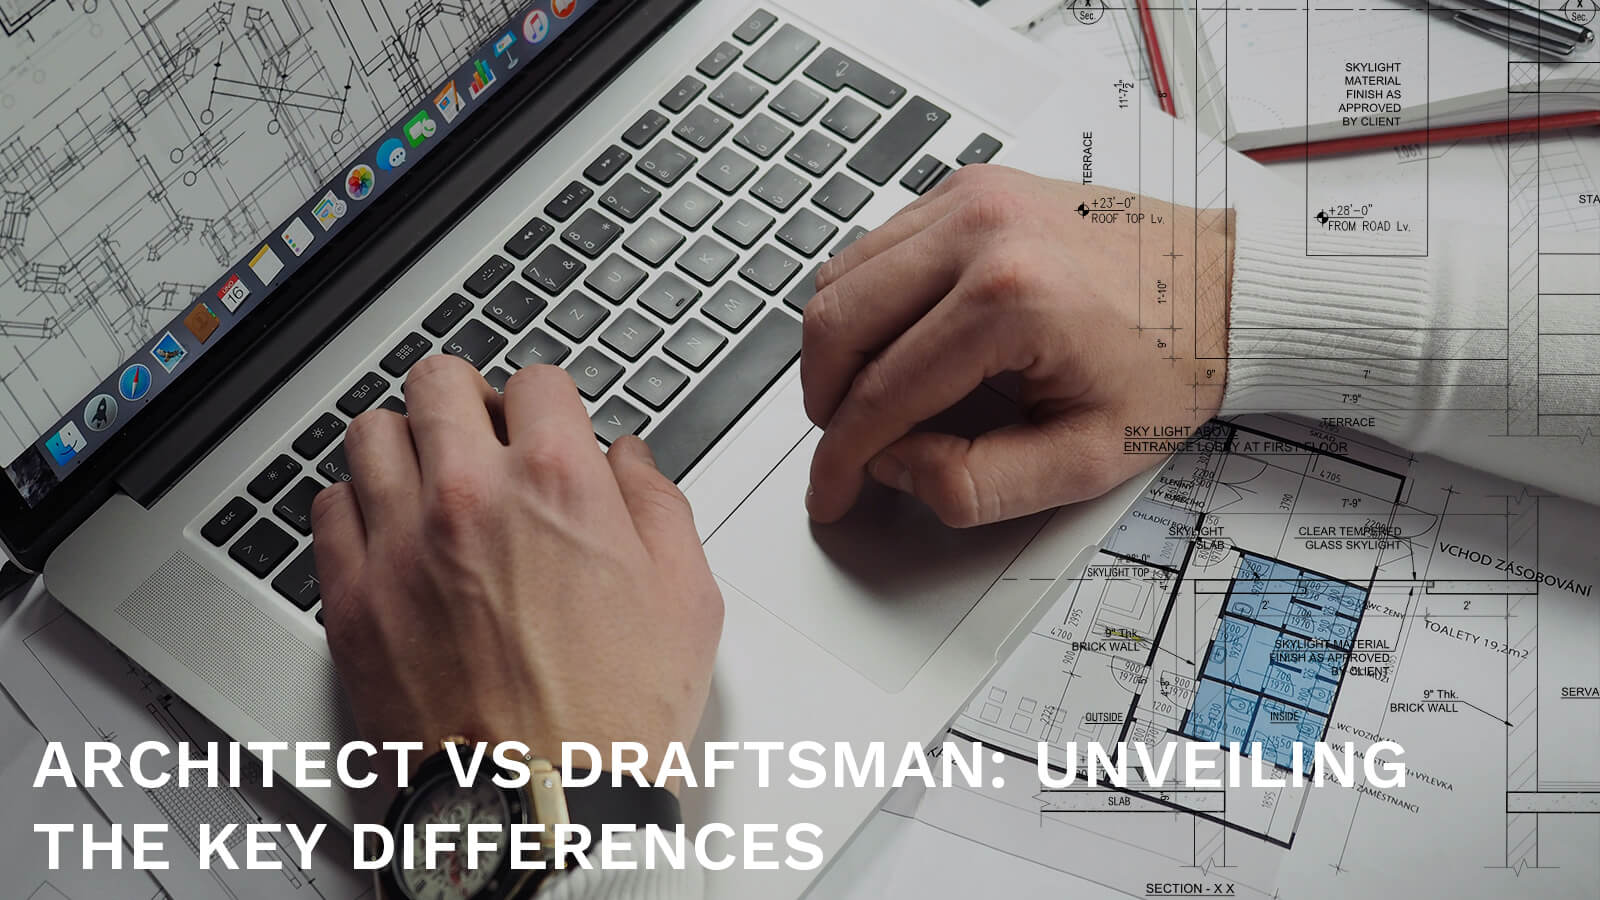 Architect vs draftsman unveiling differences